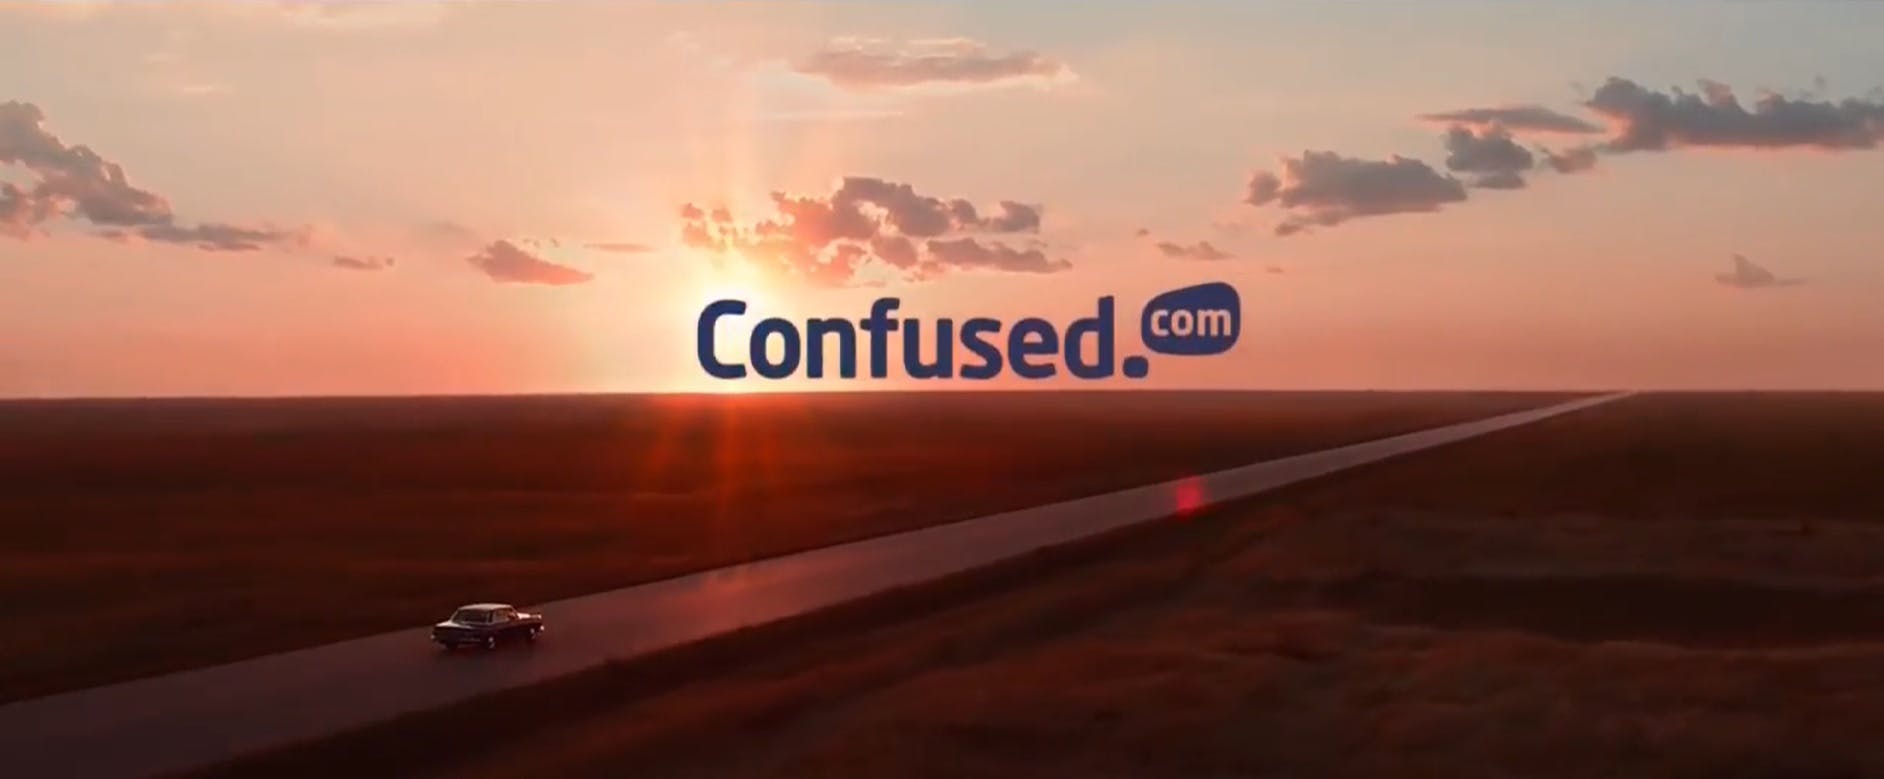 How Confused.com rebuilt its brand through customer insight, doing things differently and taking a long-term view